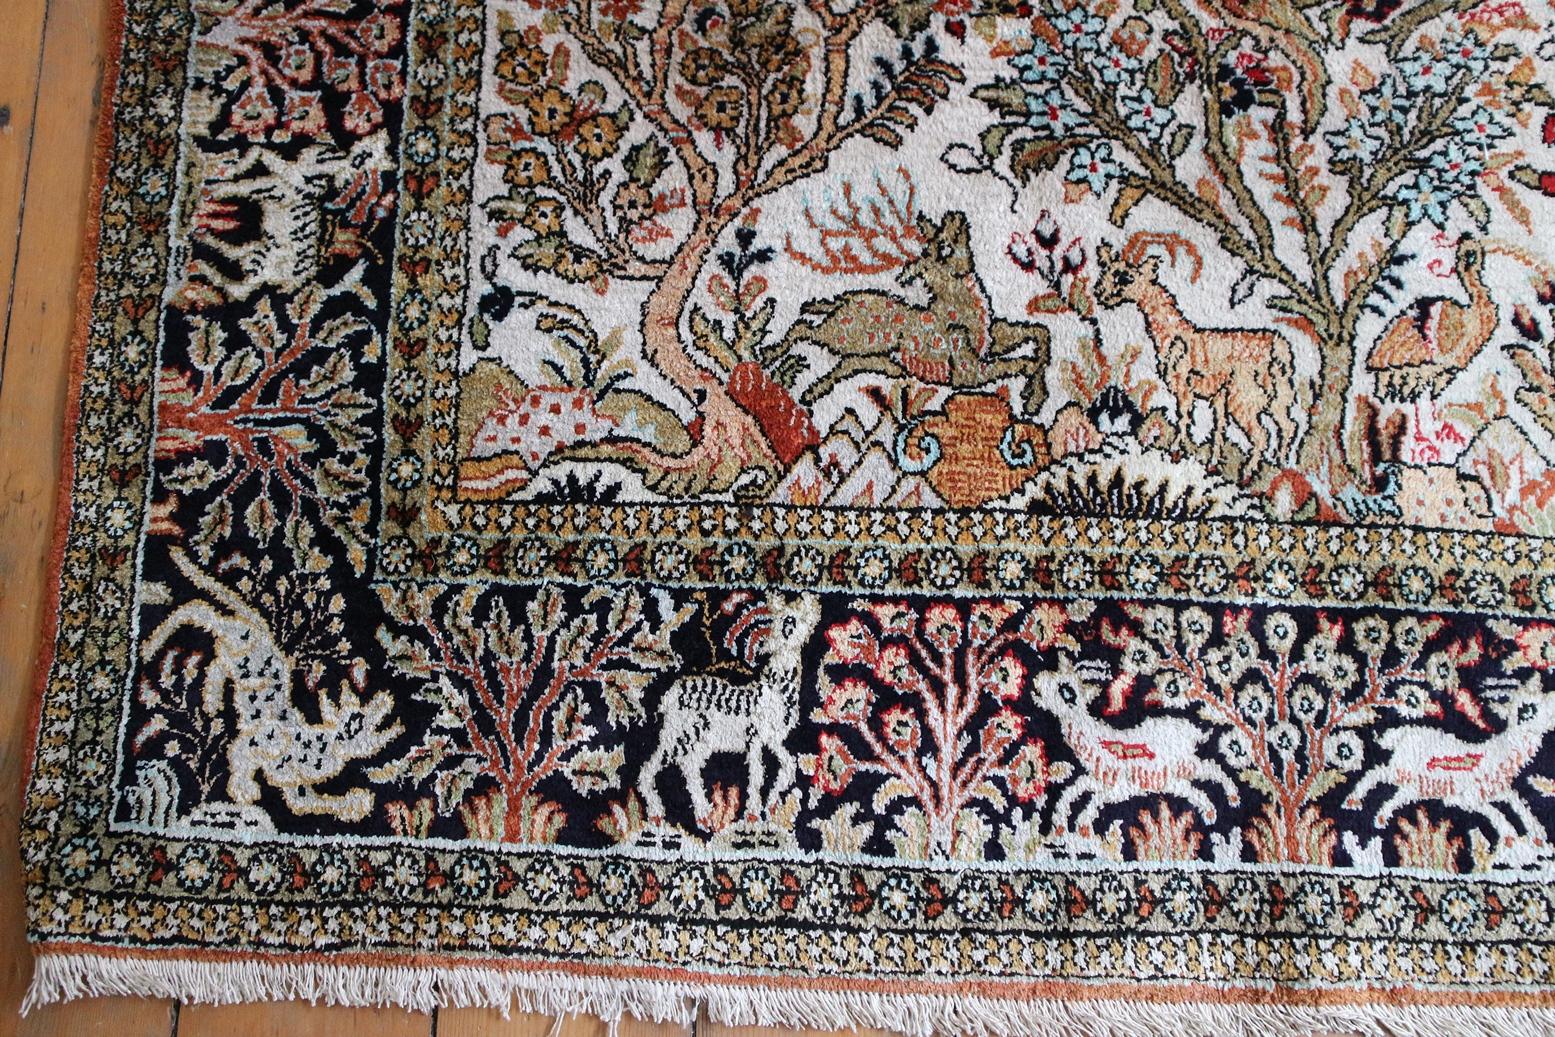 This beautiful silk rug is delicacy woven with the famous Persian pattern, tree of life, by artistic weavers from Qom city. the border is dark and background crème color full of blooms, flowers and animals. Tree of life is representation of Paradise